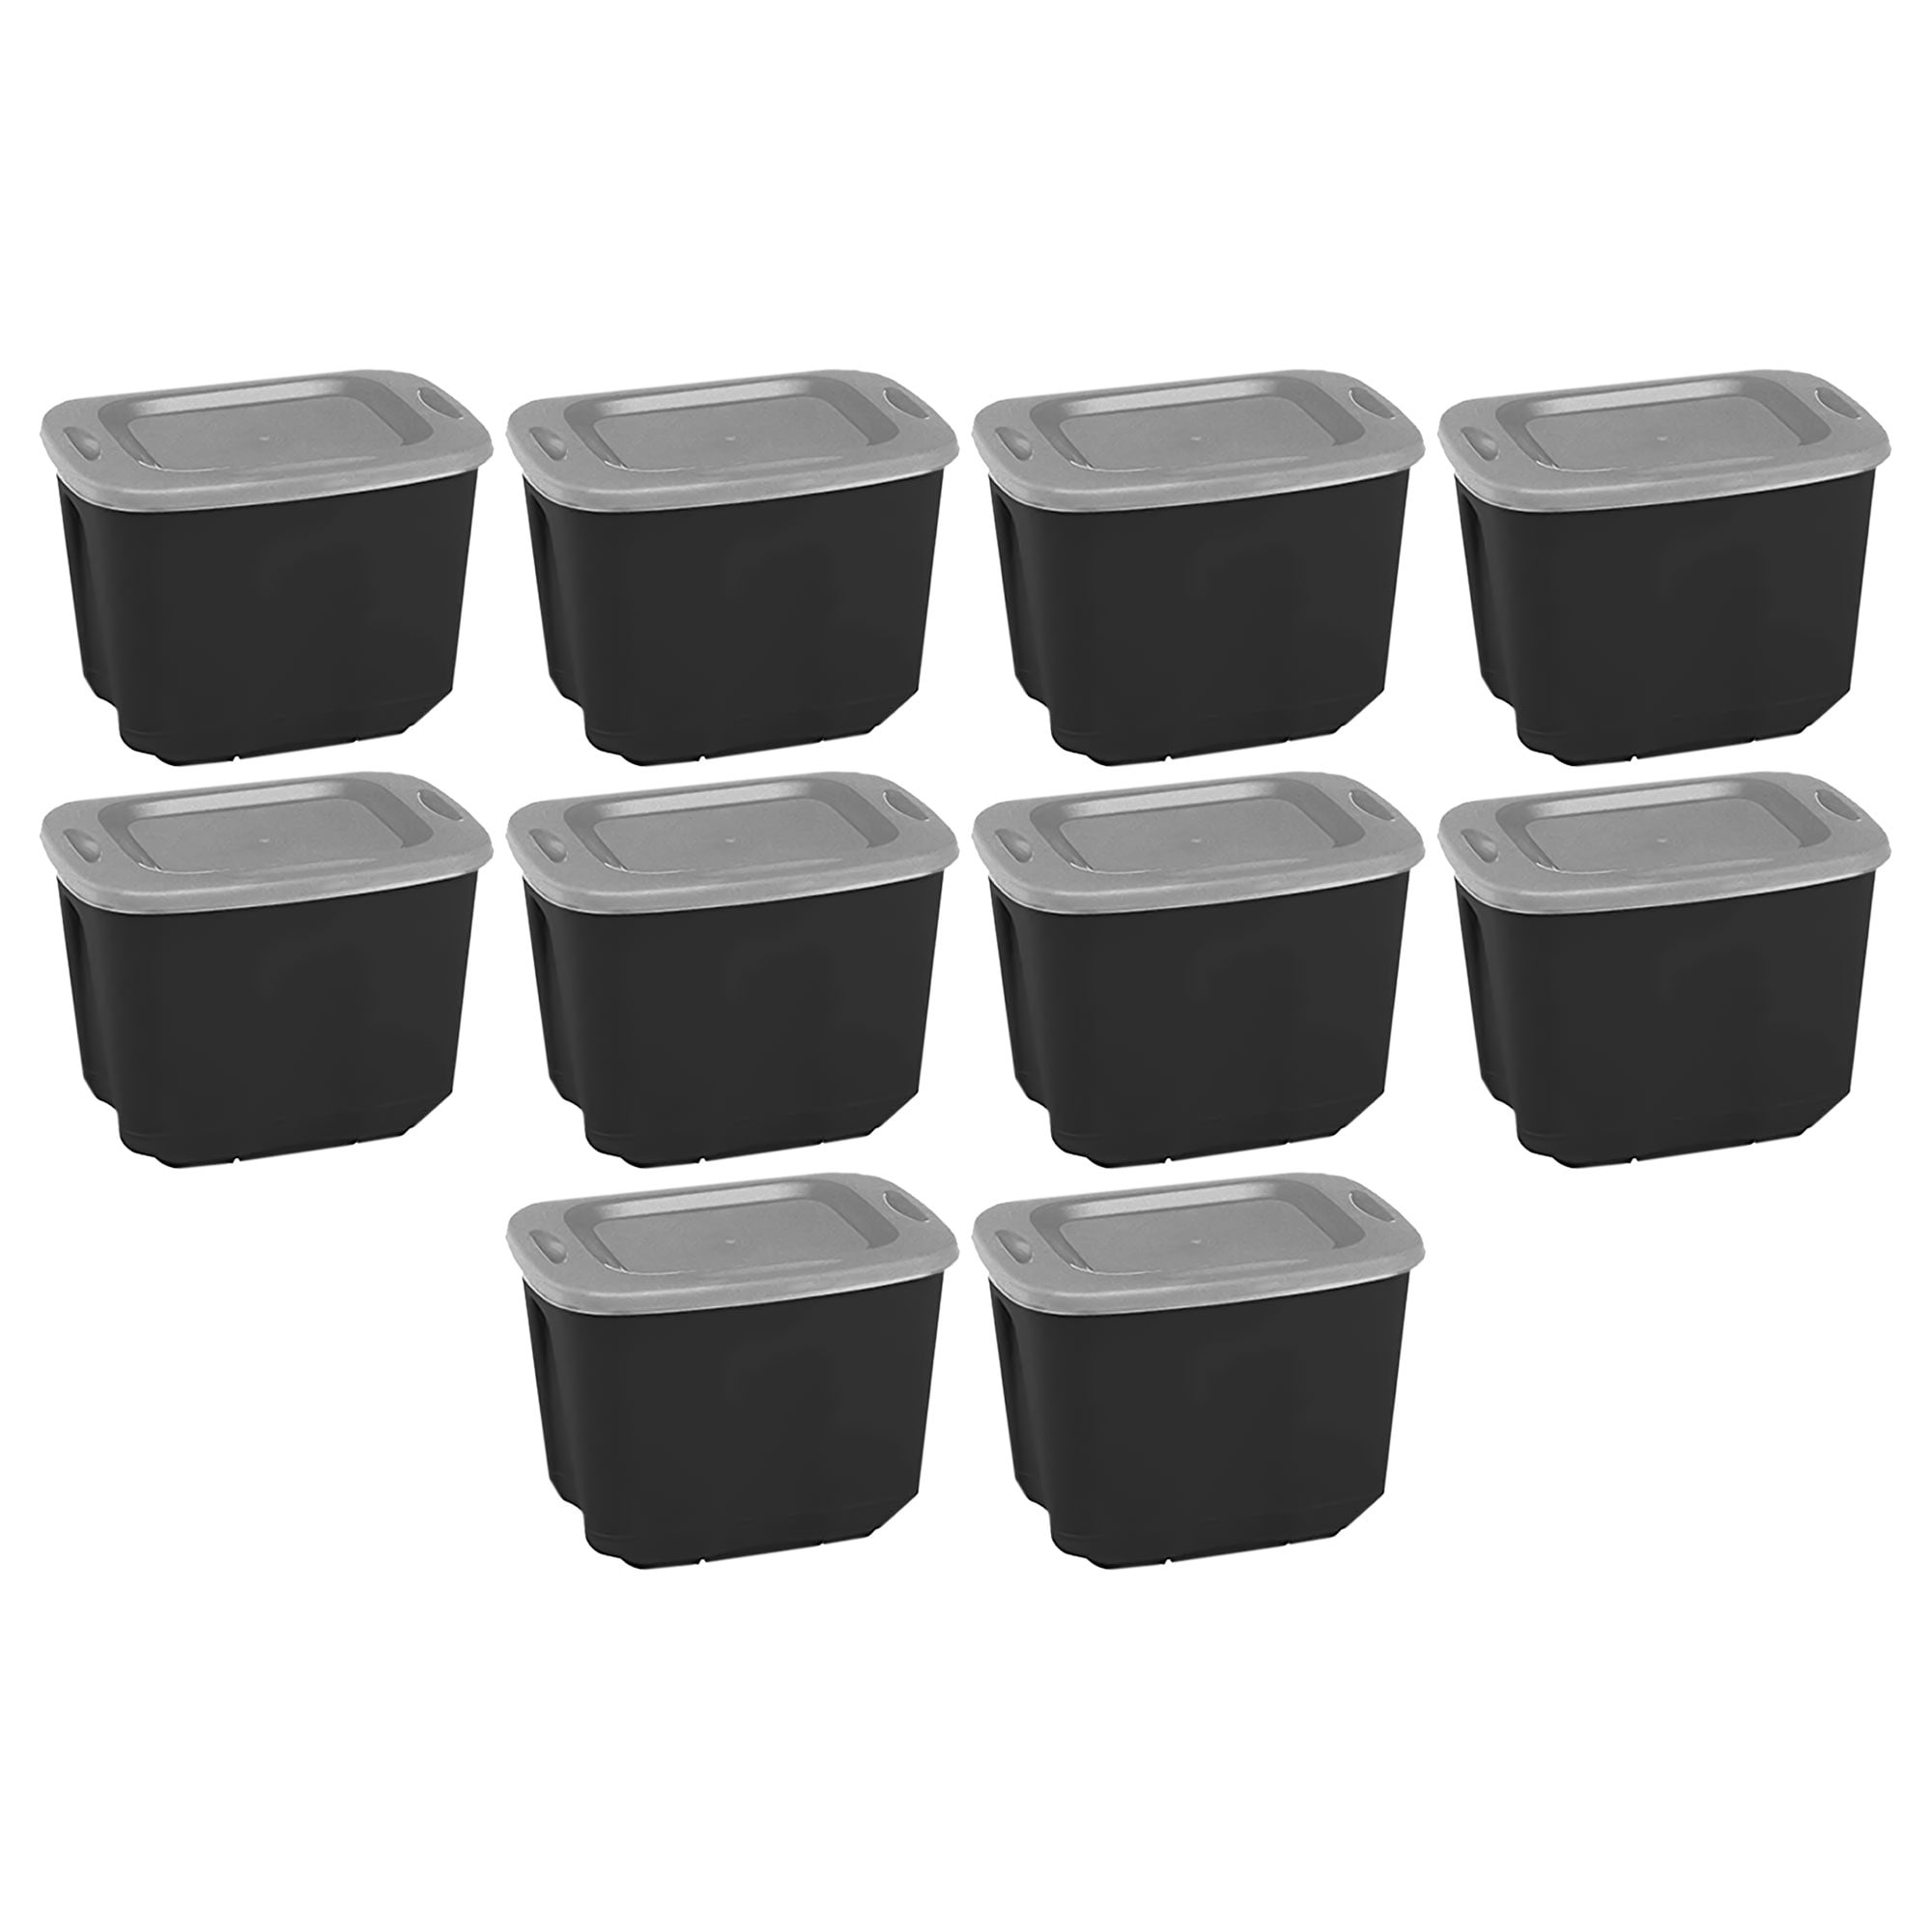 https://ak1.ostkcdn.com/images/products/is/images/direct/d154ff14bf657c54a0a8201836288818894e87ac/Homz-10-Gallon-Durable-Molded-Plastic-Storage-Bin-w--Lid-%2810-Pack%29.jpg